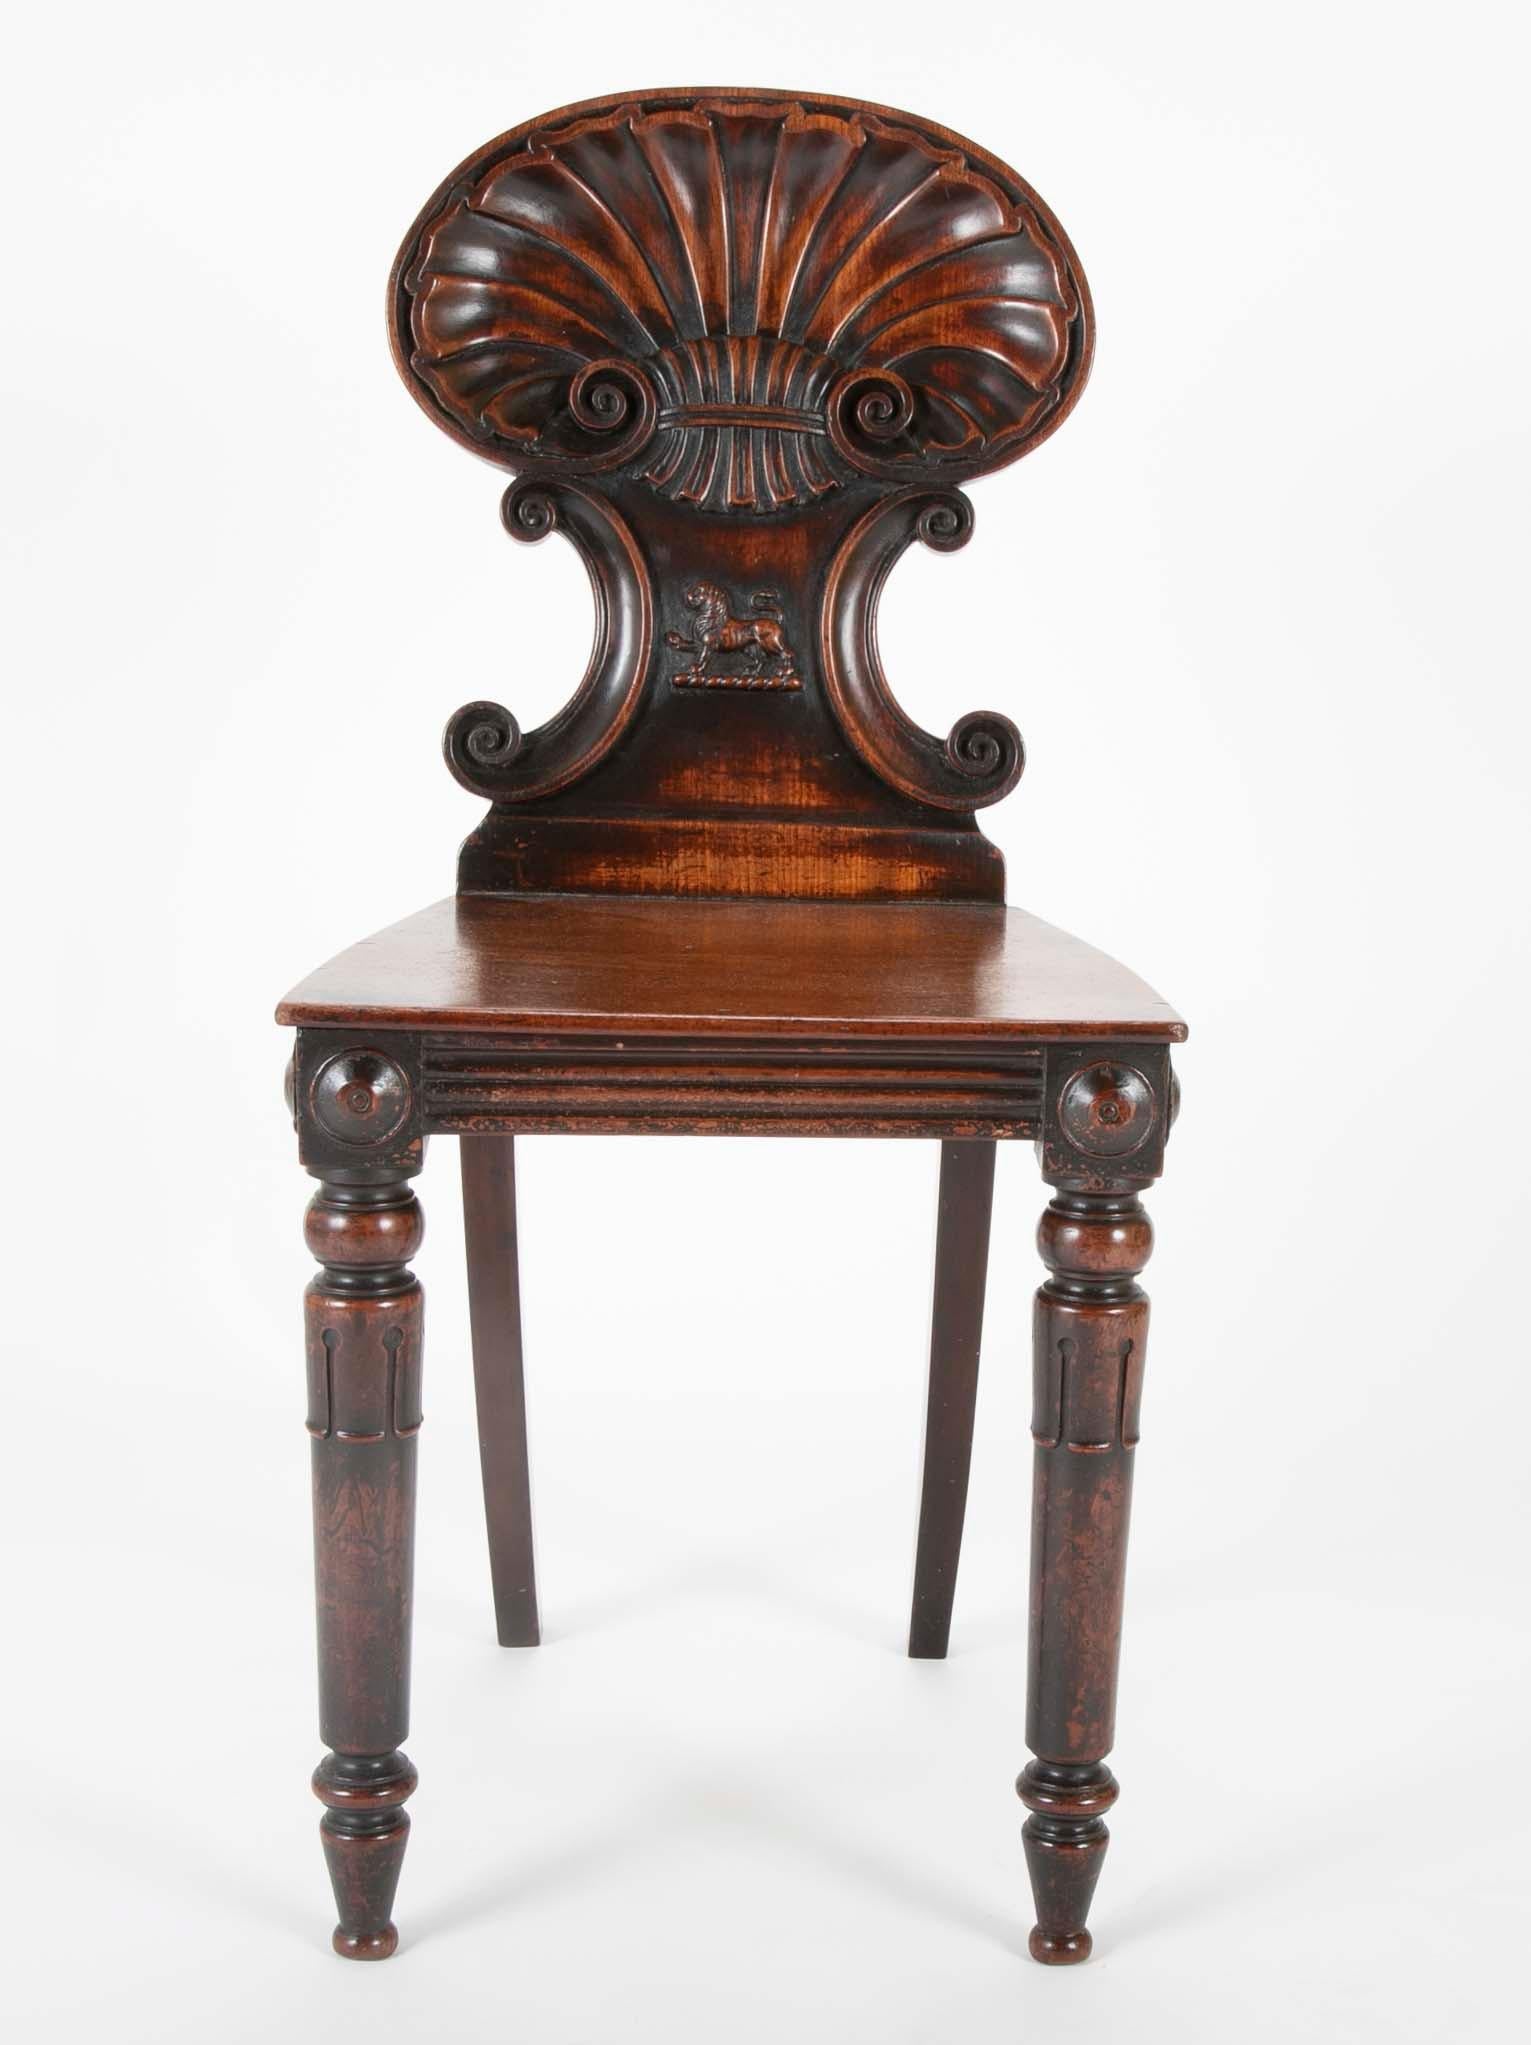 Hand-Carved Early 19th Century Georgian Shell Back Hall Chair with Lion Carving